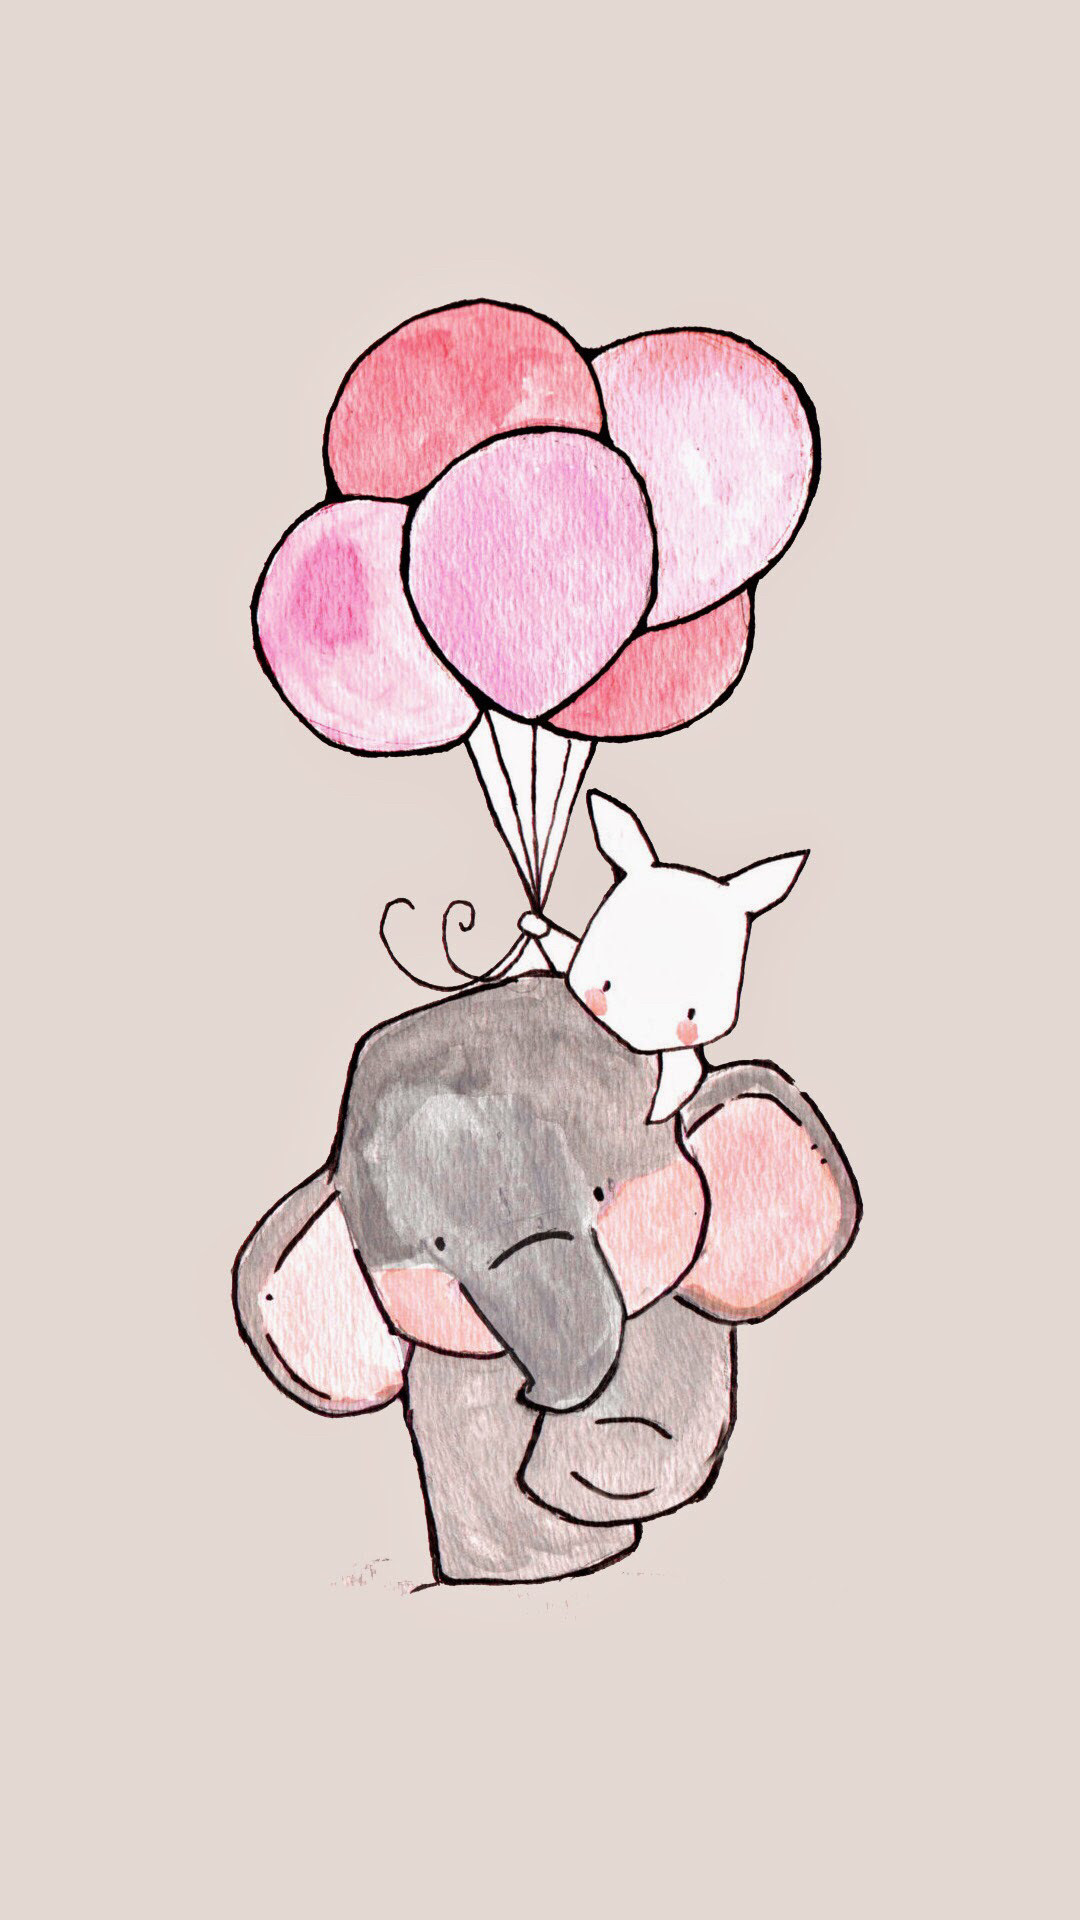 Iphone wallpaper girly elephant and rabbit